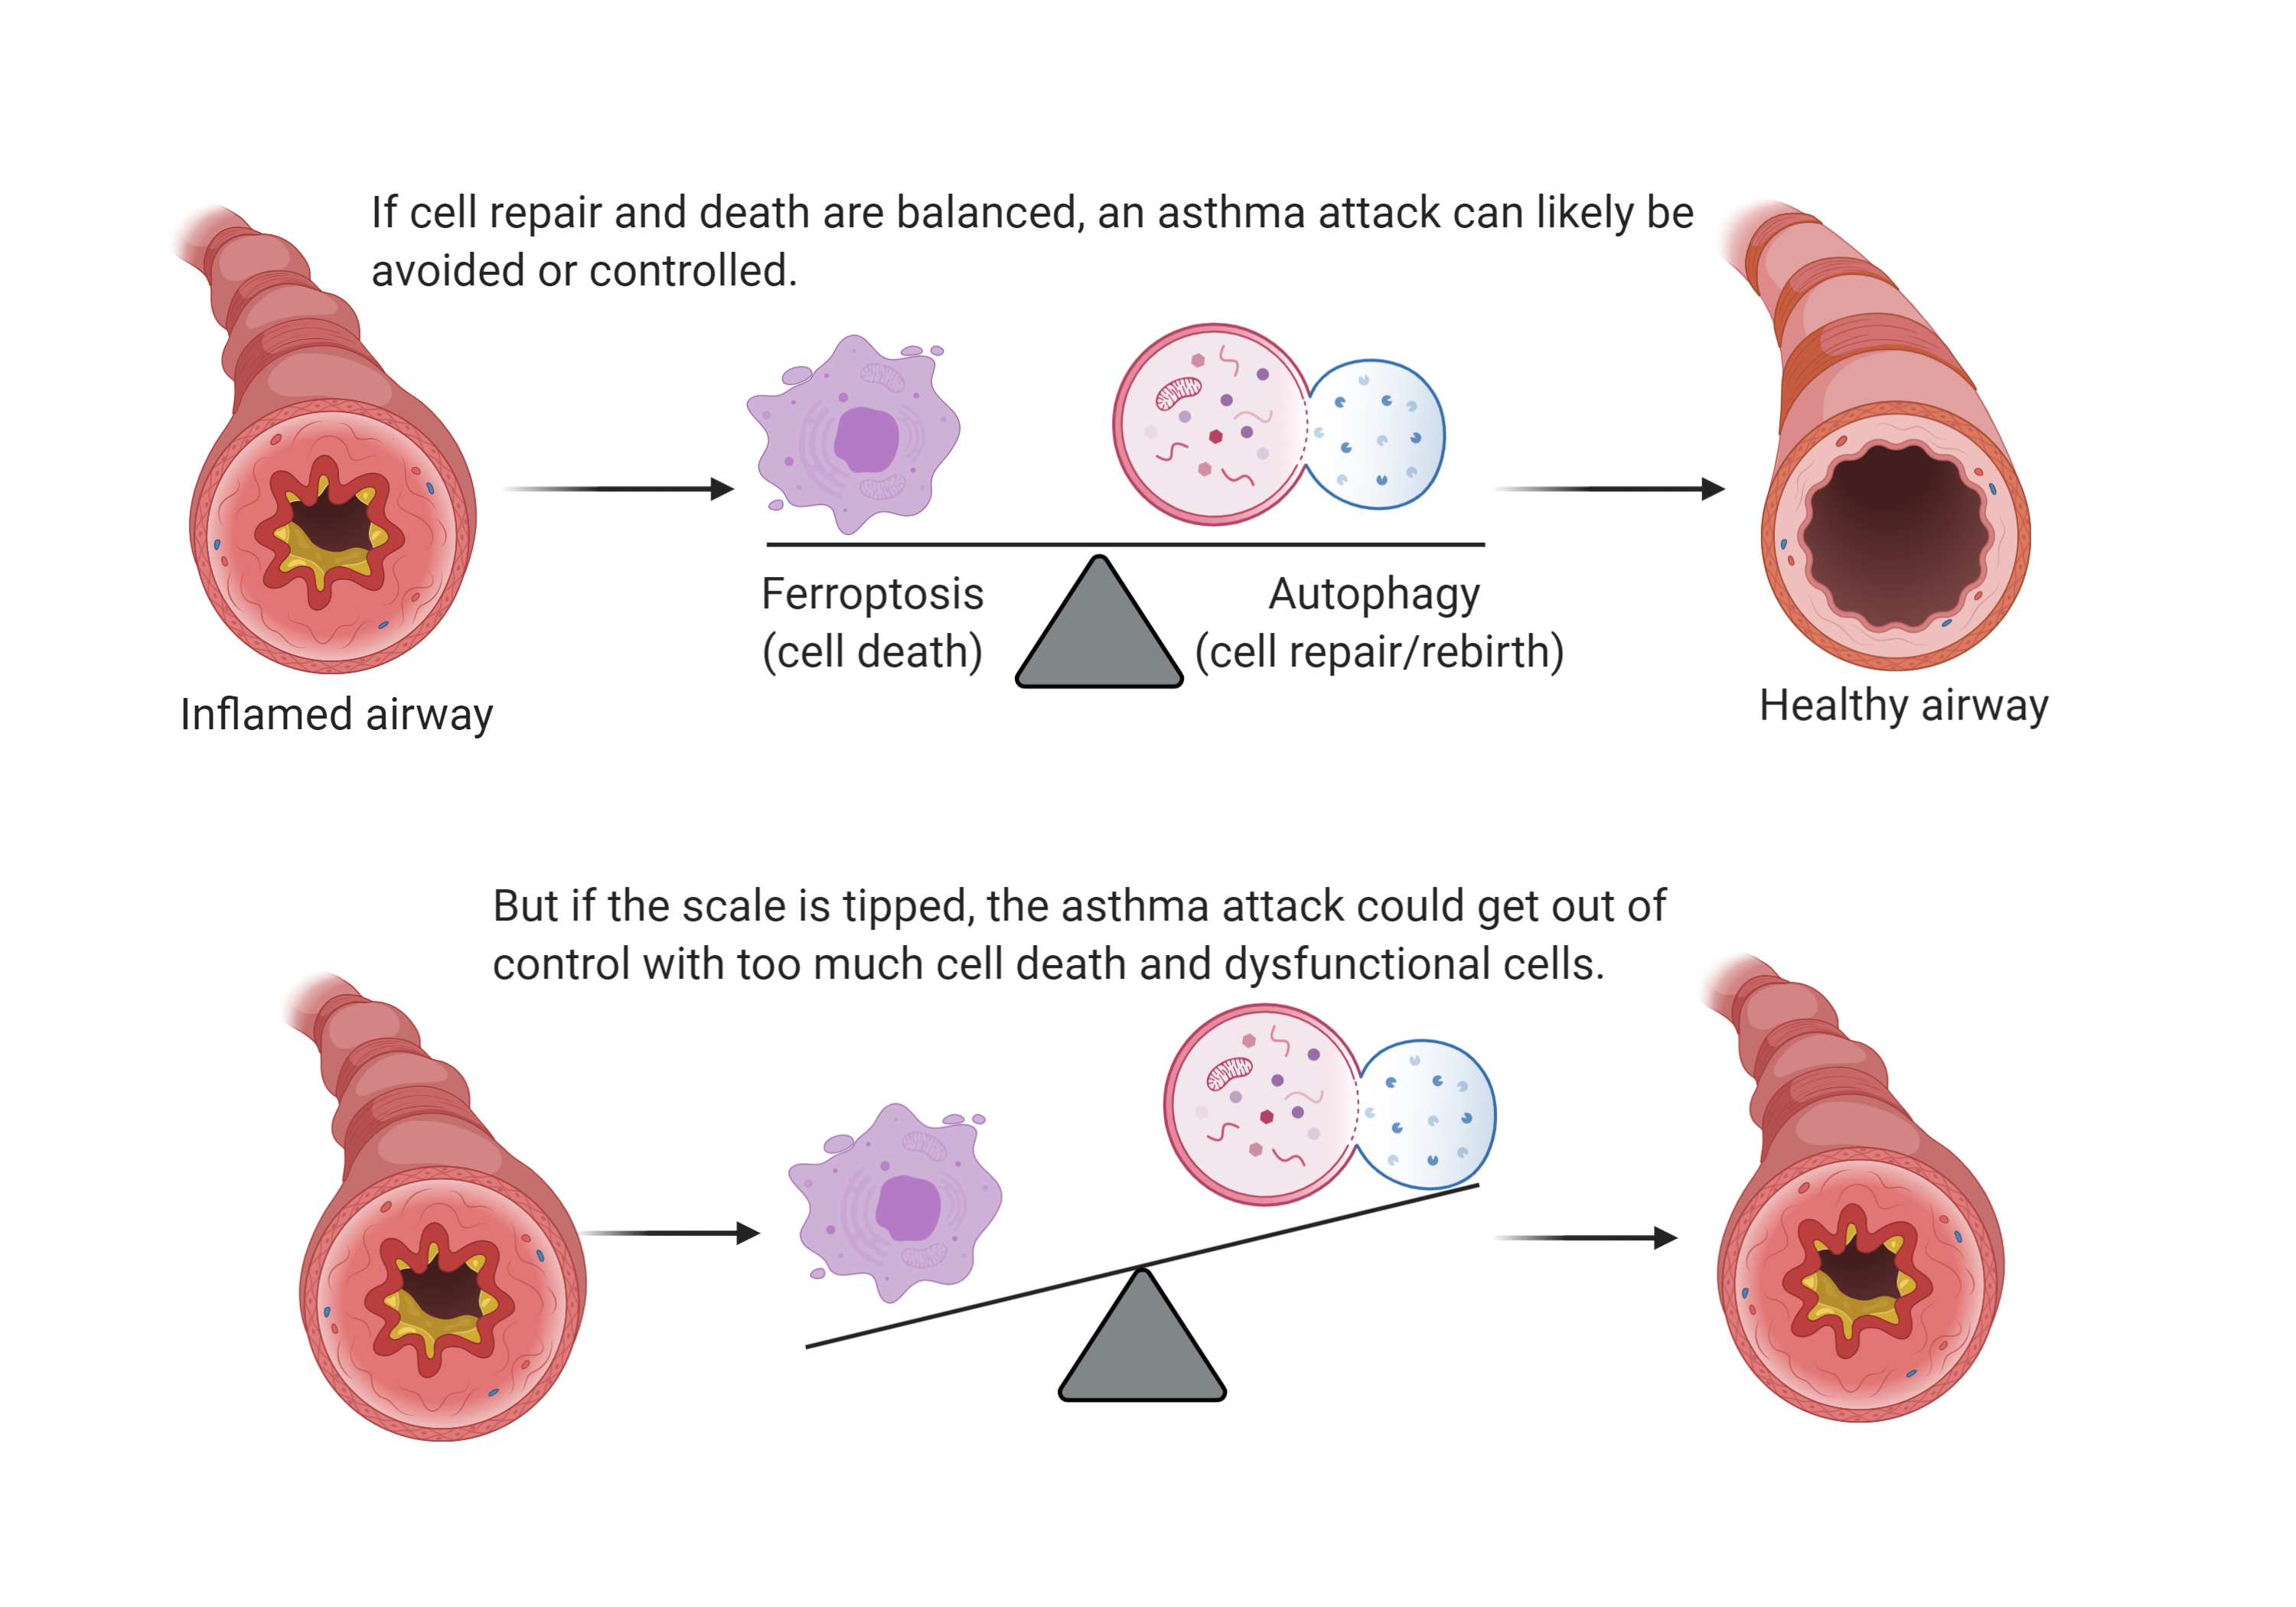 Diagram detailing the balance of cell death compared to cell repair and its link to inflamed and healthy airways.